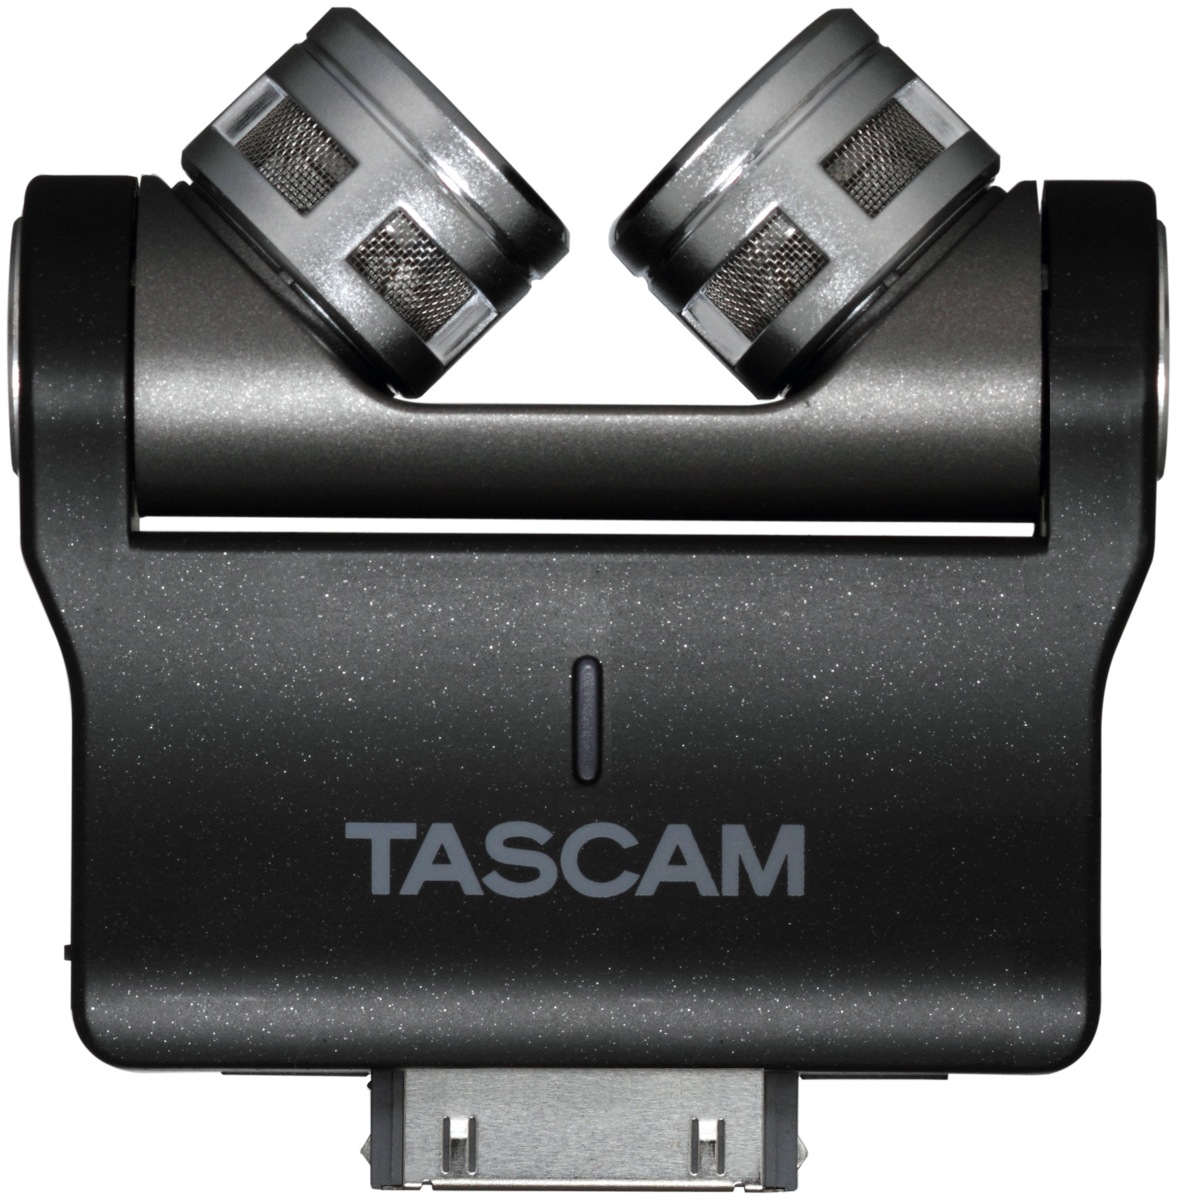 Tascam Tascam iM2X Stereo X-Y Microphone for iOS Devices